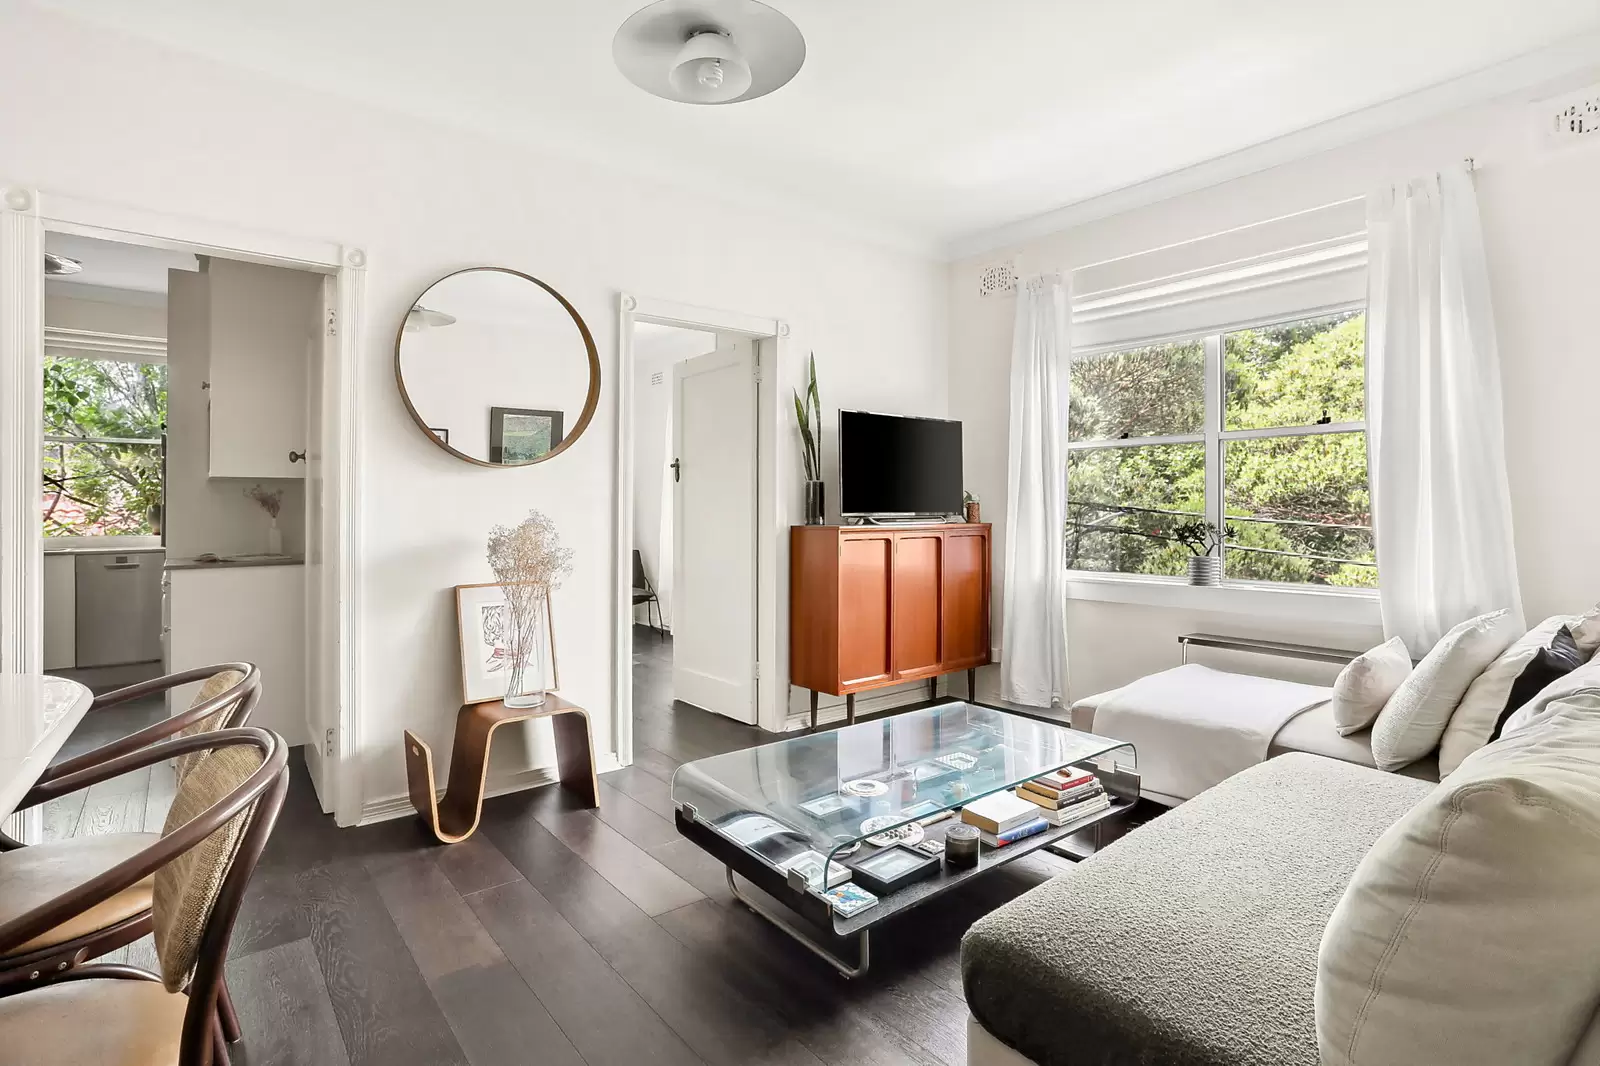 Photo #1: 12/493 Old South Head Road, Rose Bay - Sold by Sydney Sotheby's International Realty